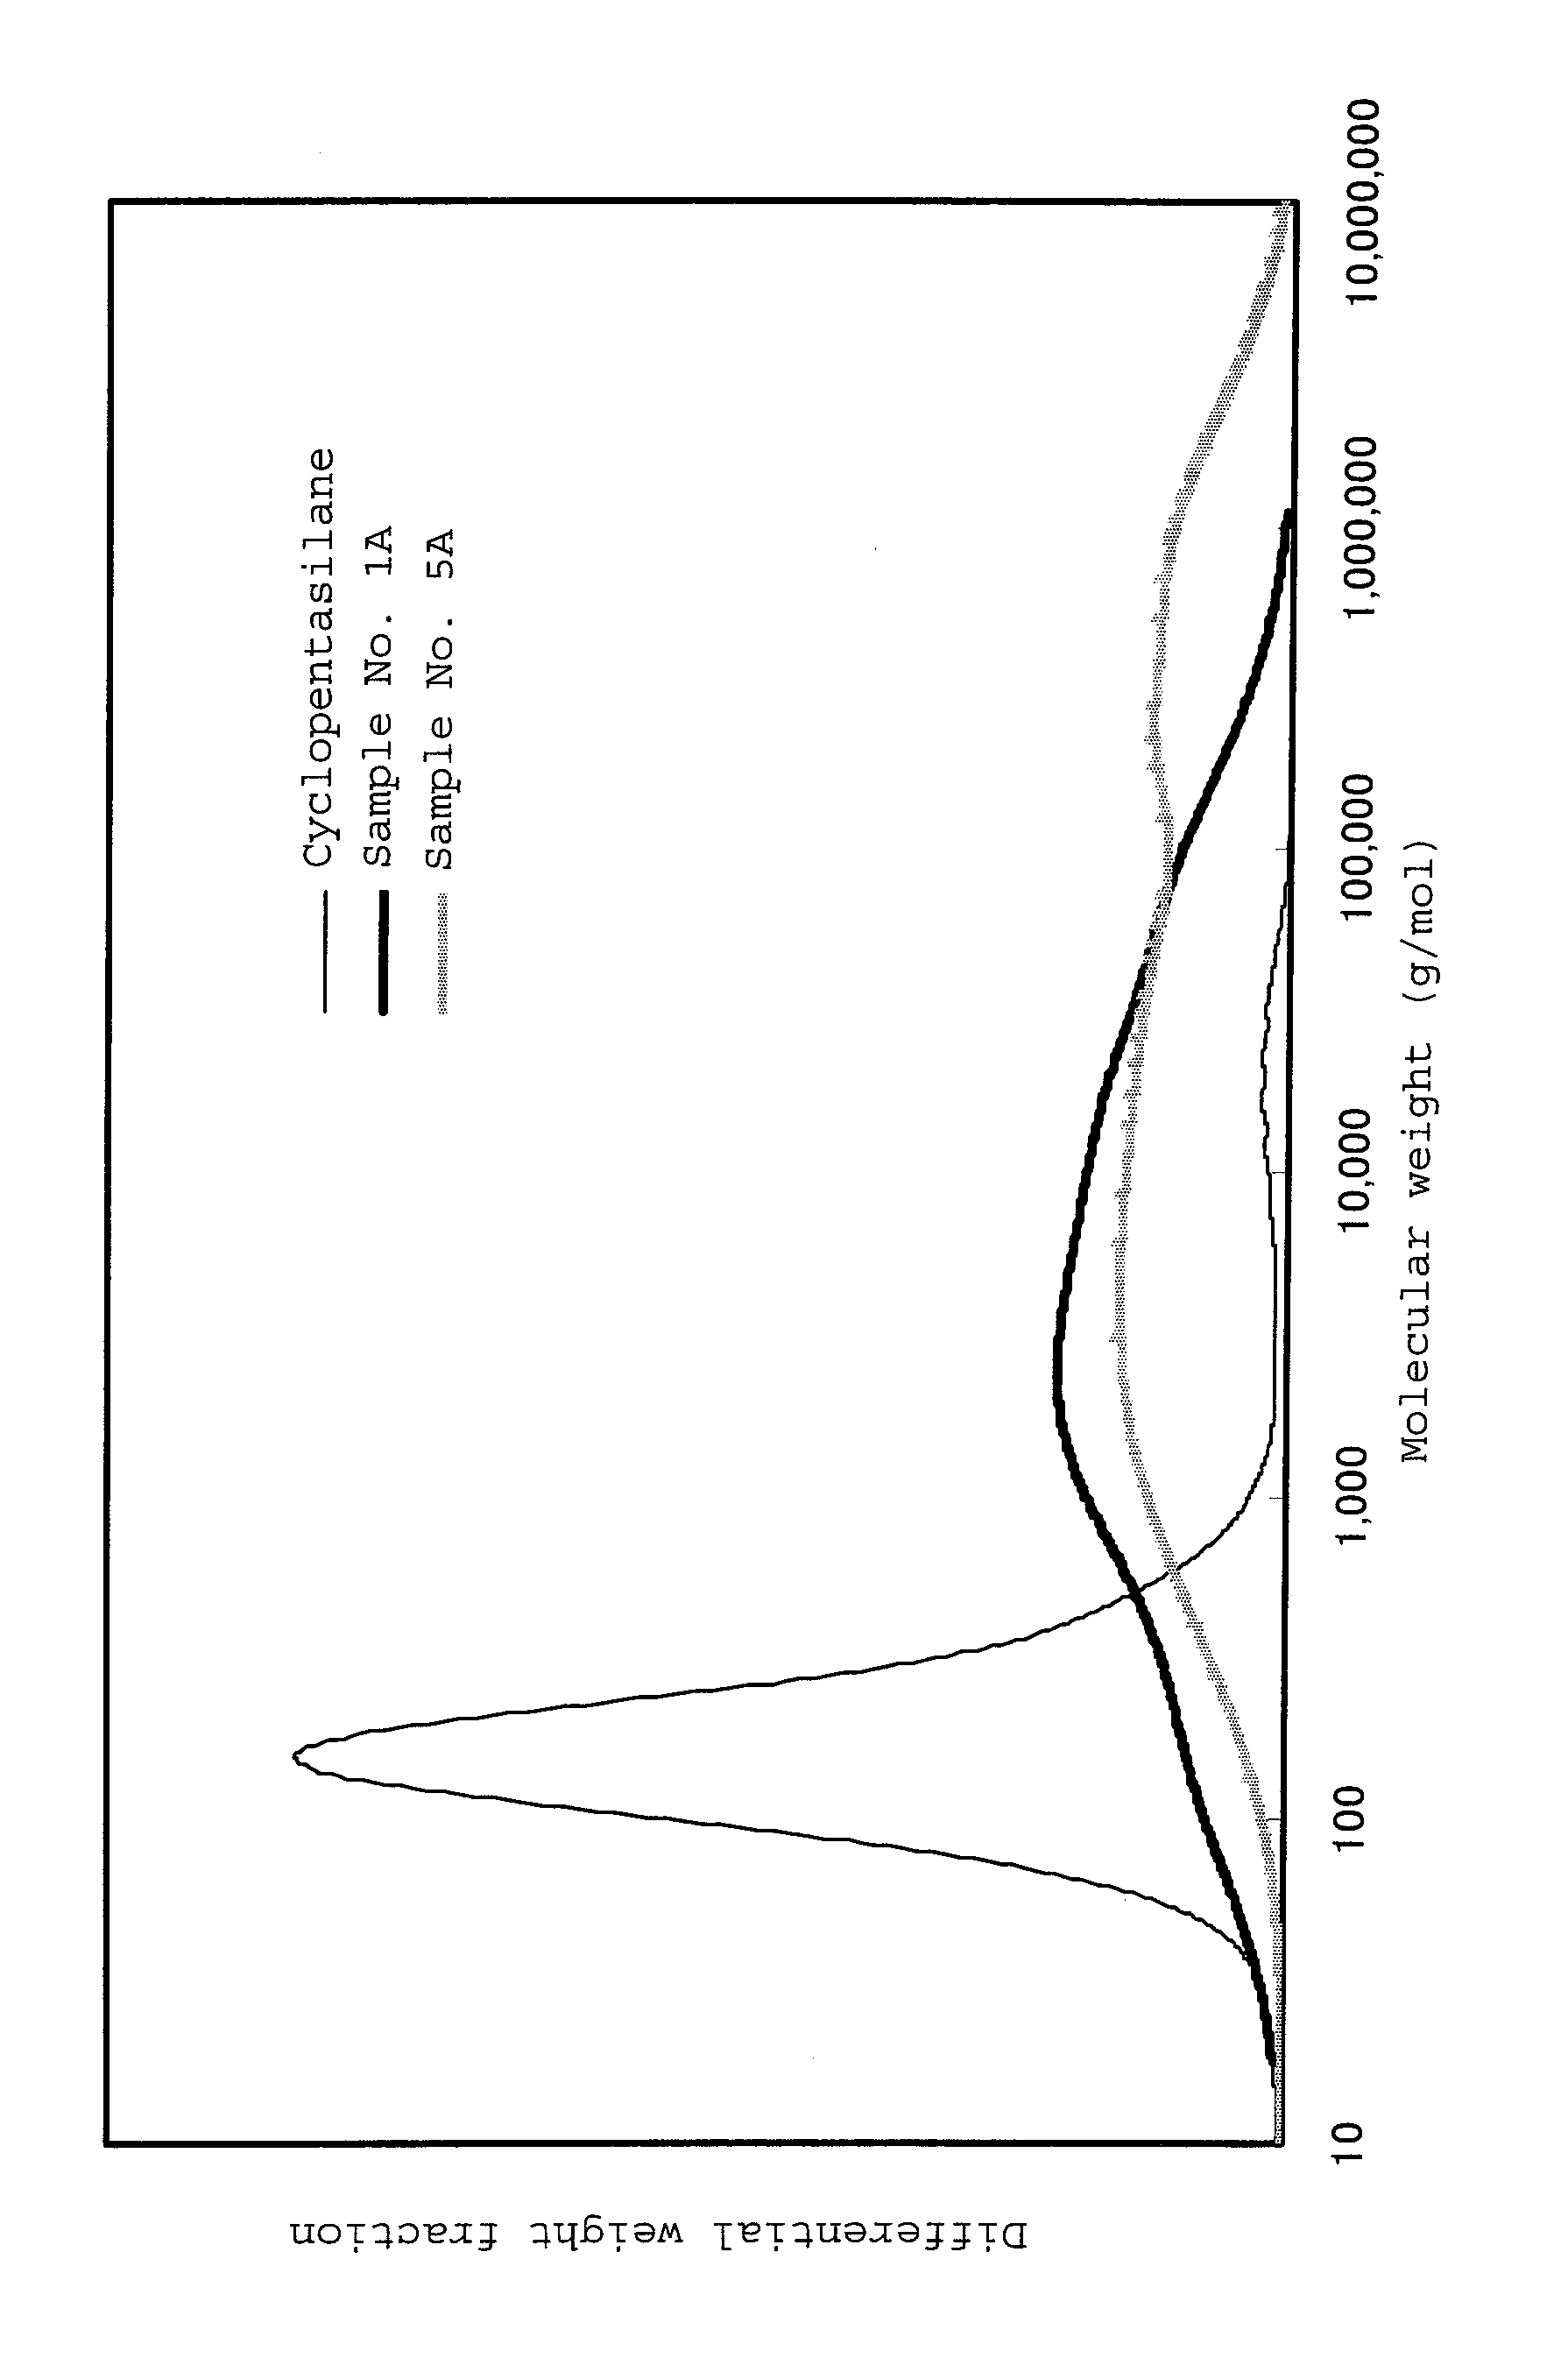 High order silane composition and method of manufacturing a film-coated substrate